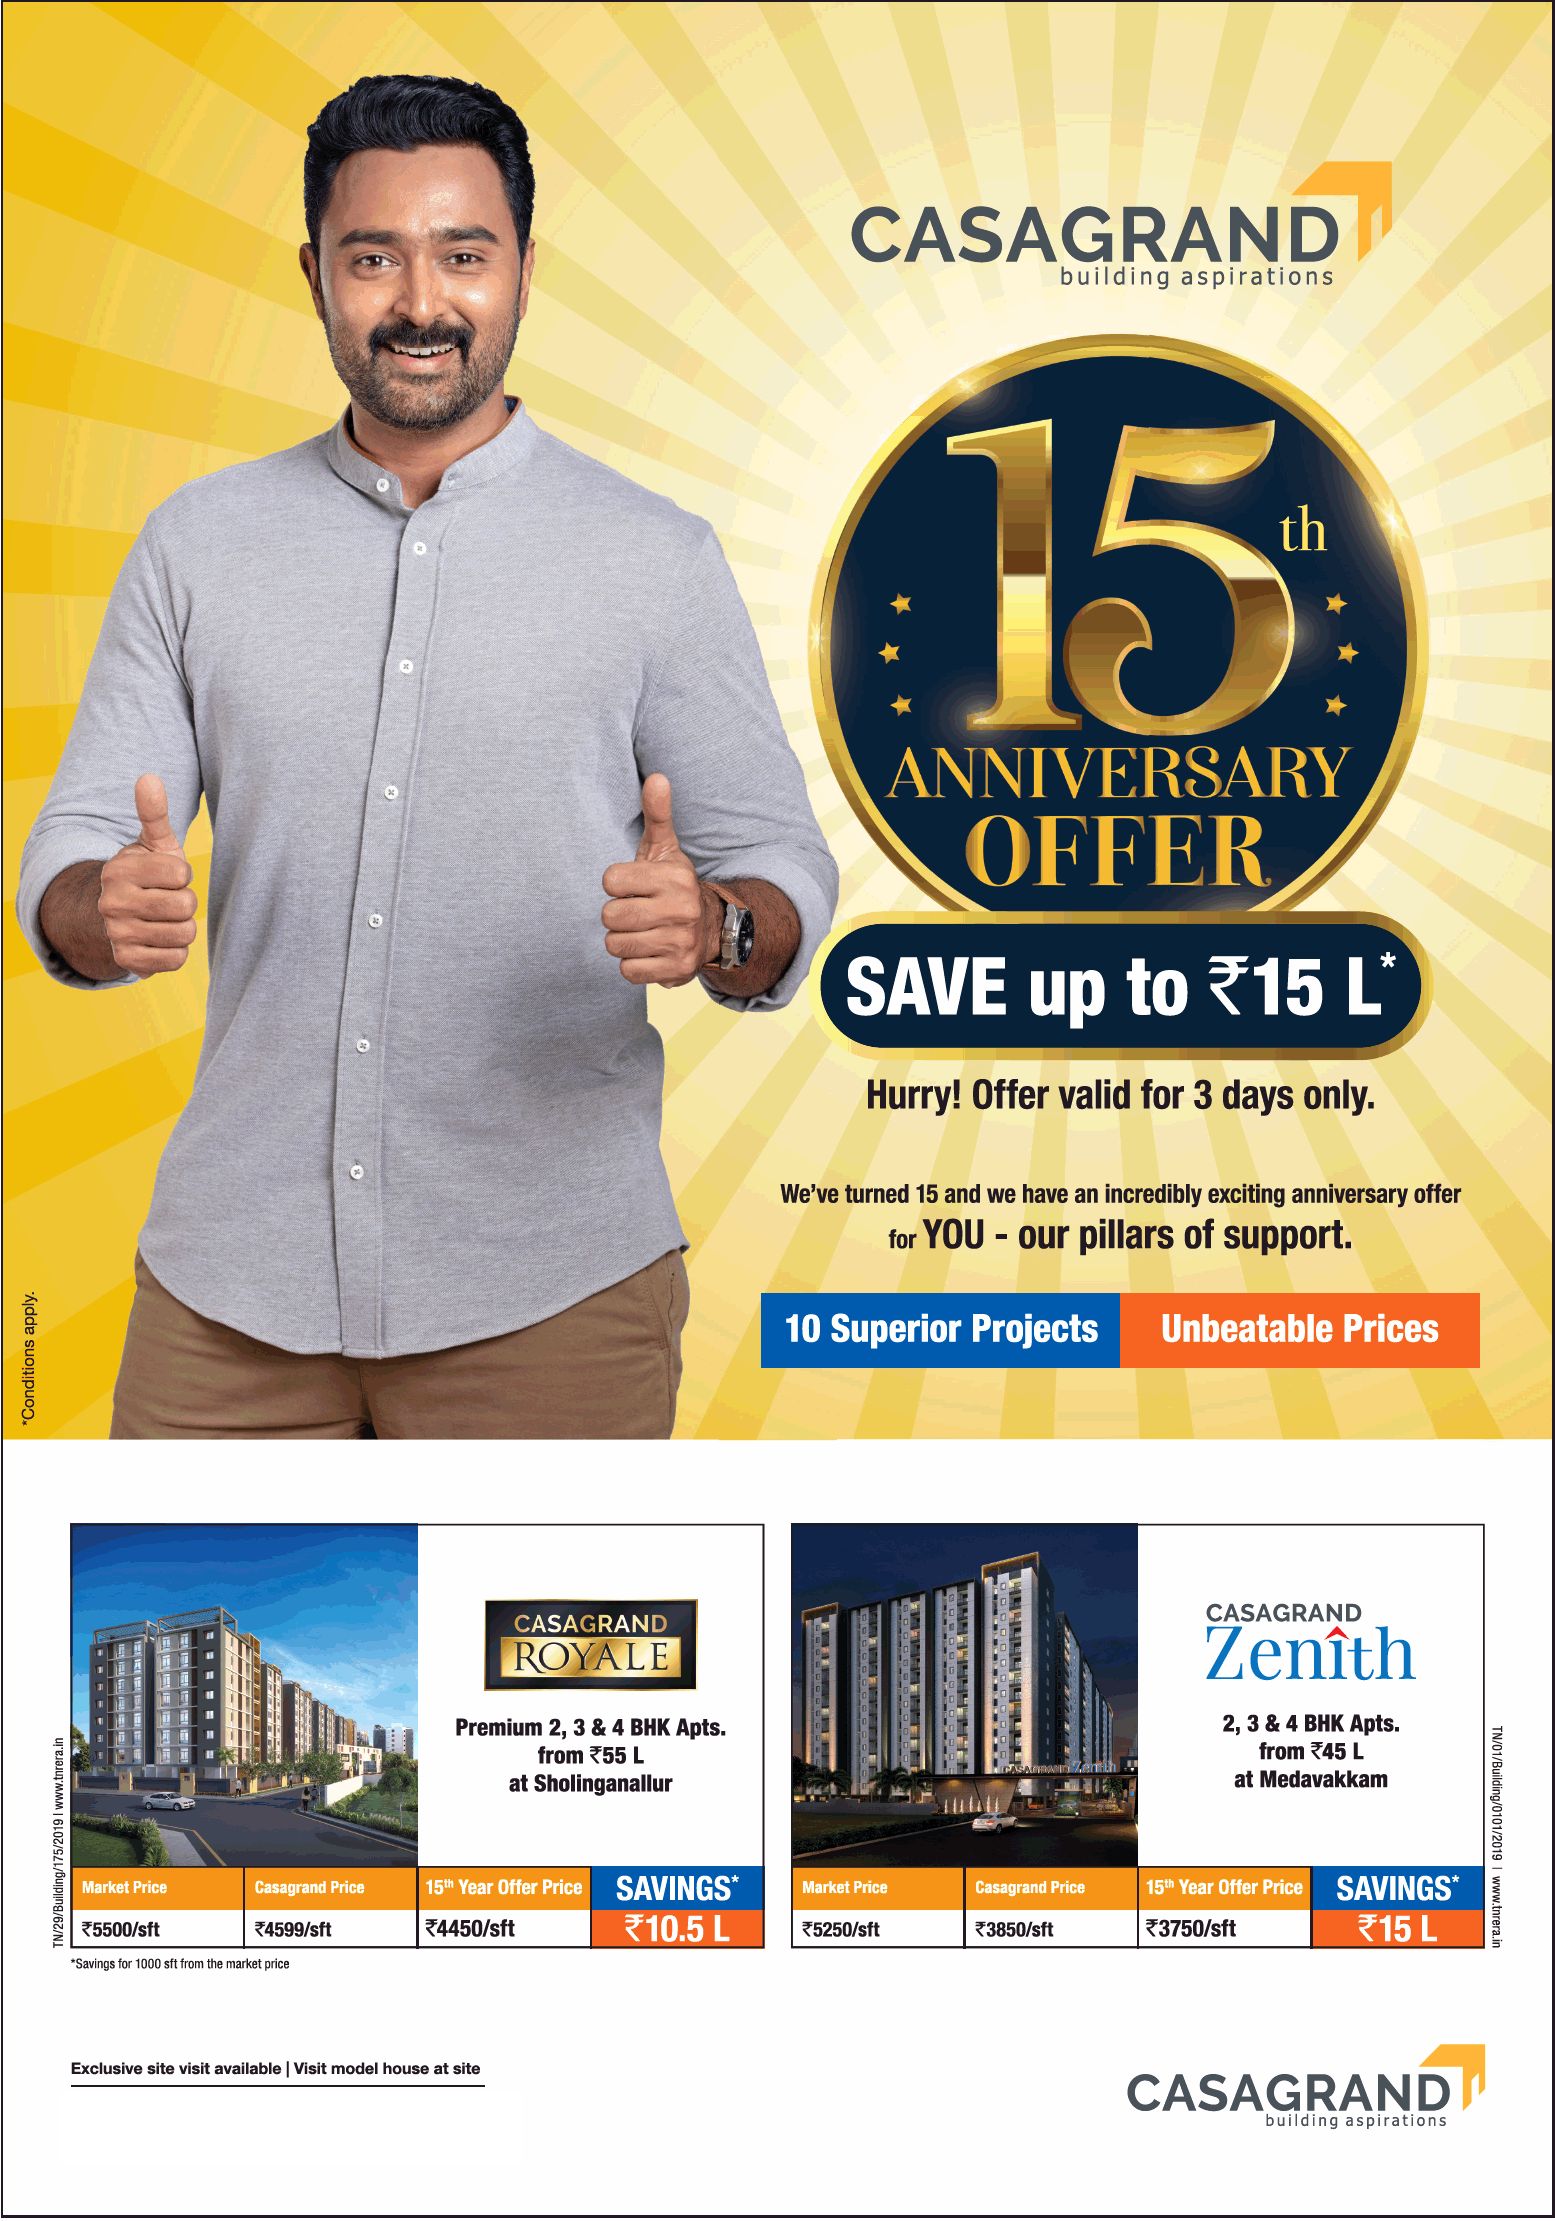 15th anniversary offer (save up to Rs15 Lac) at Casagrand in Chennai Update